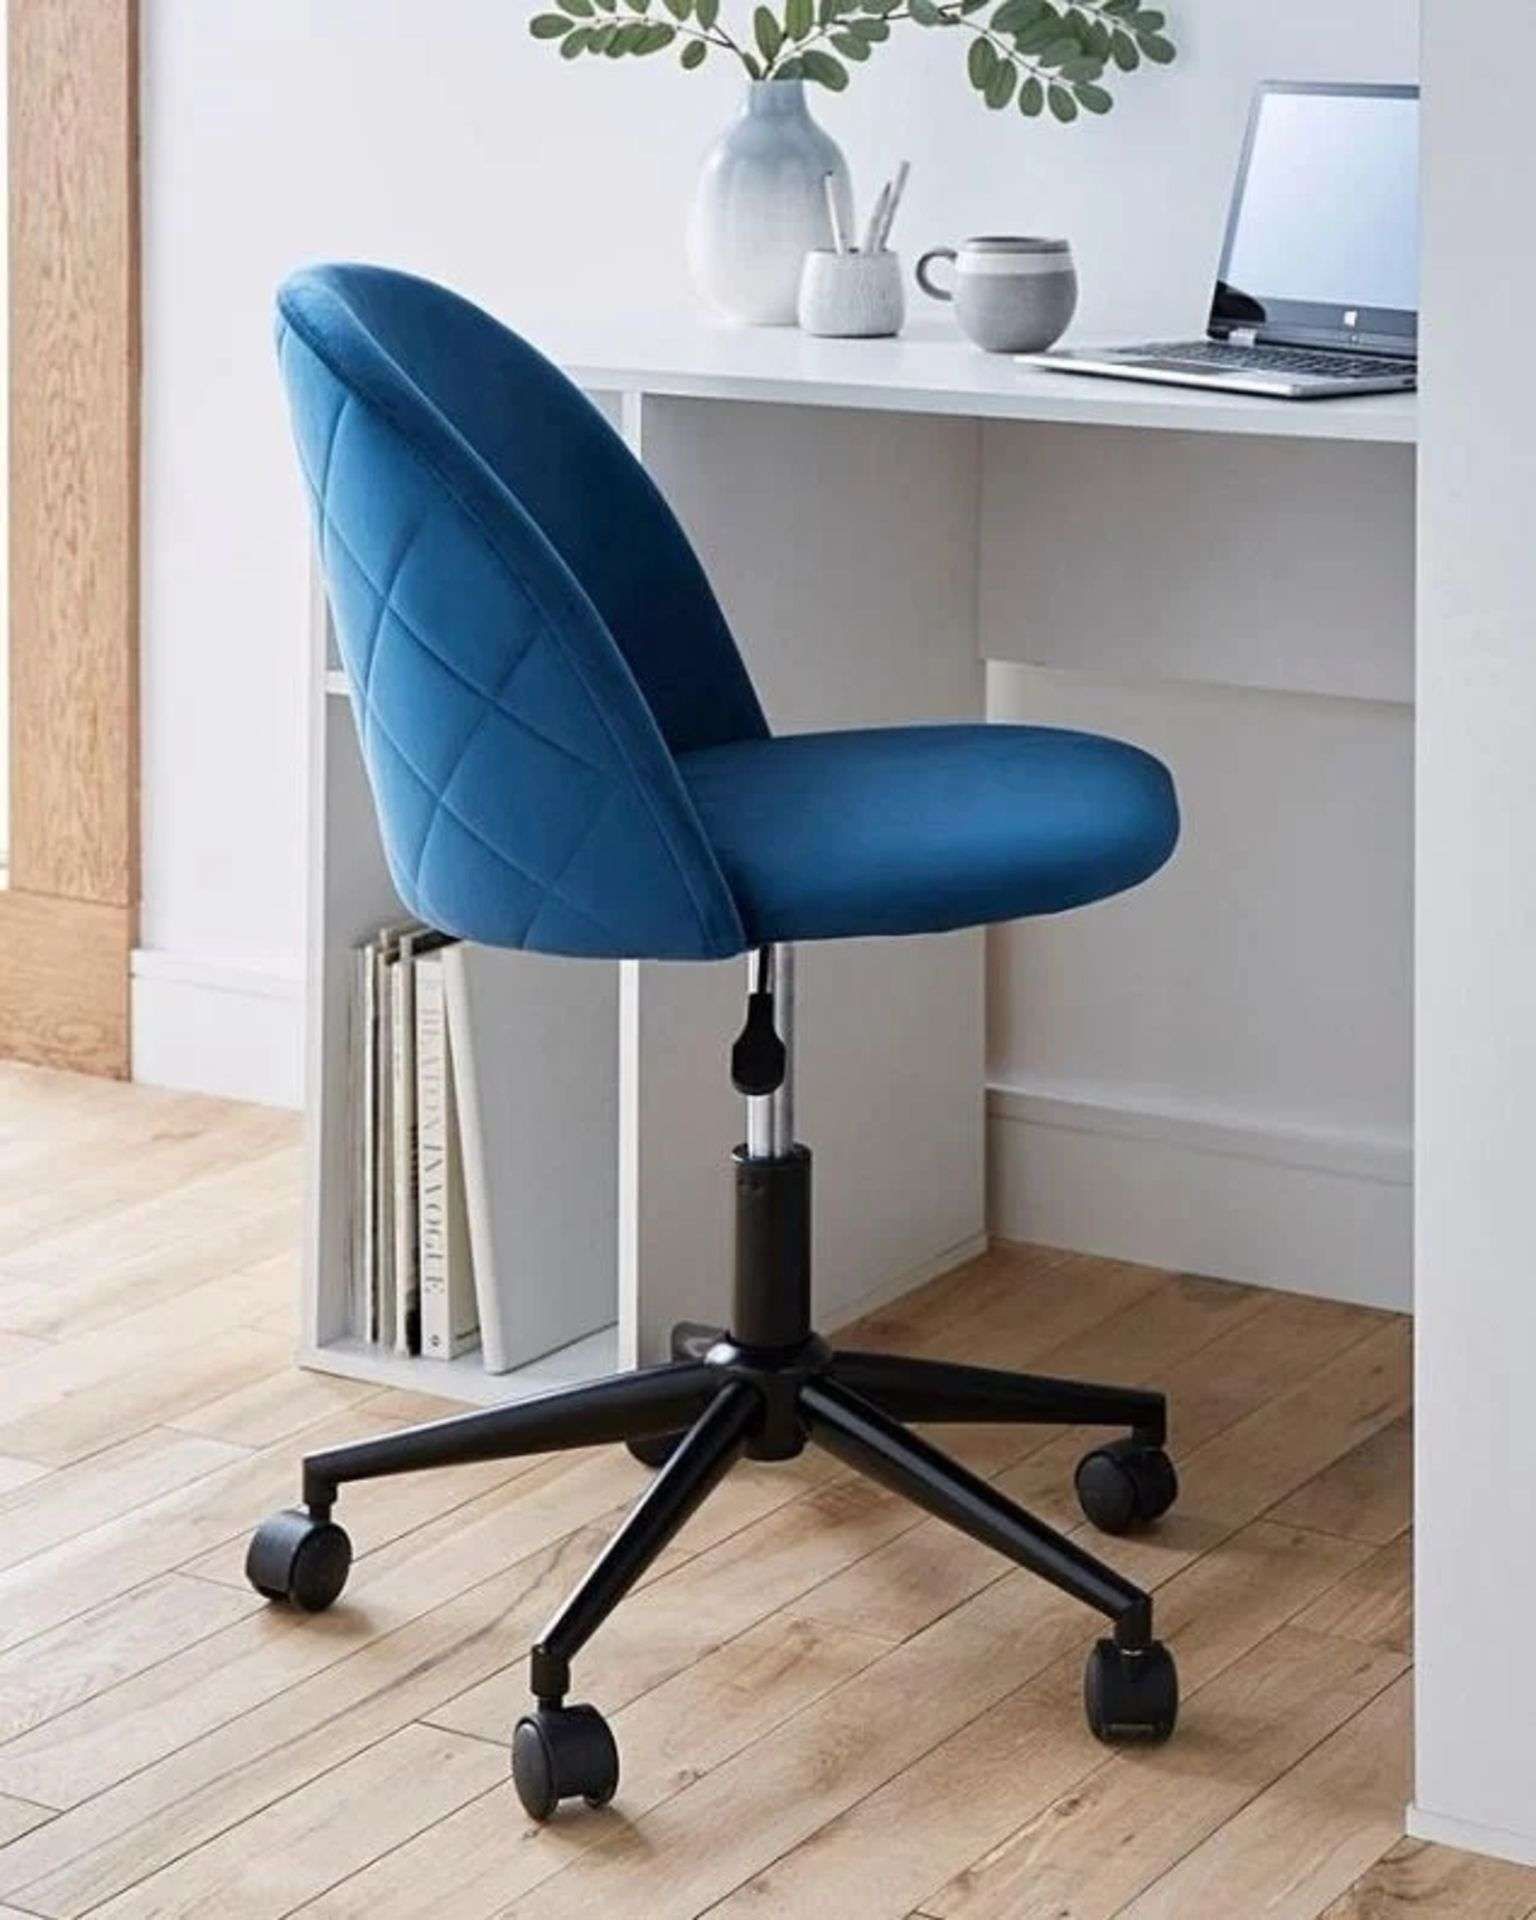 BRAND NEW KLARA NAVY AND OAK EFFECT OFFICE CHAIRS R10-10